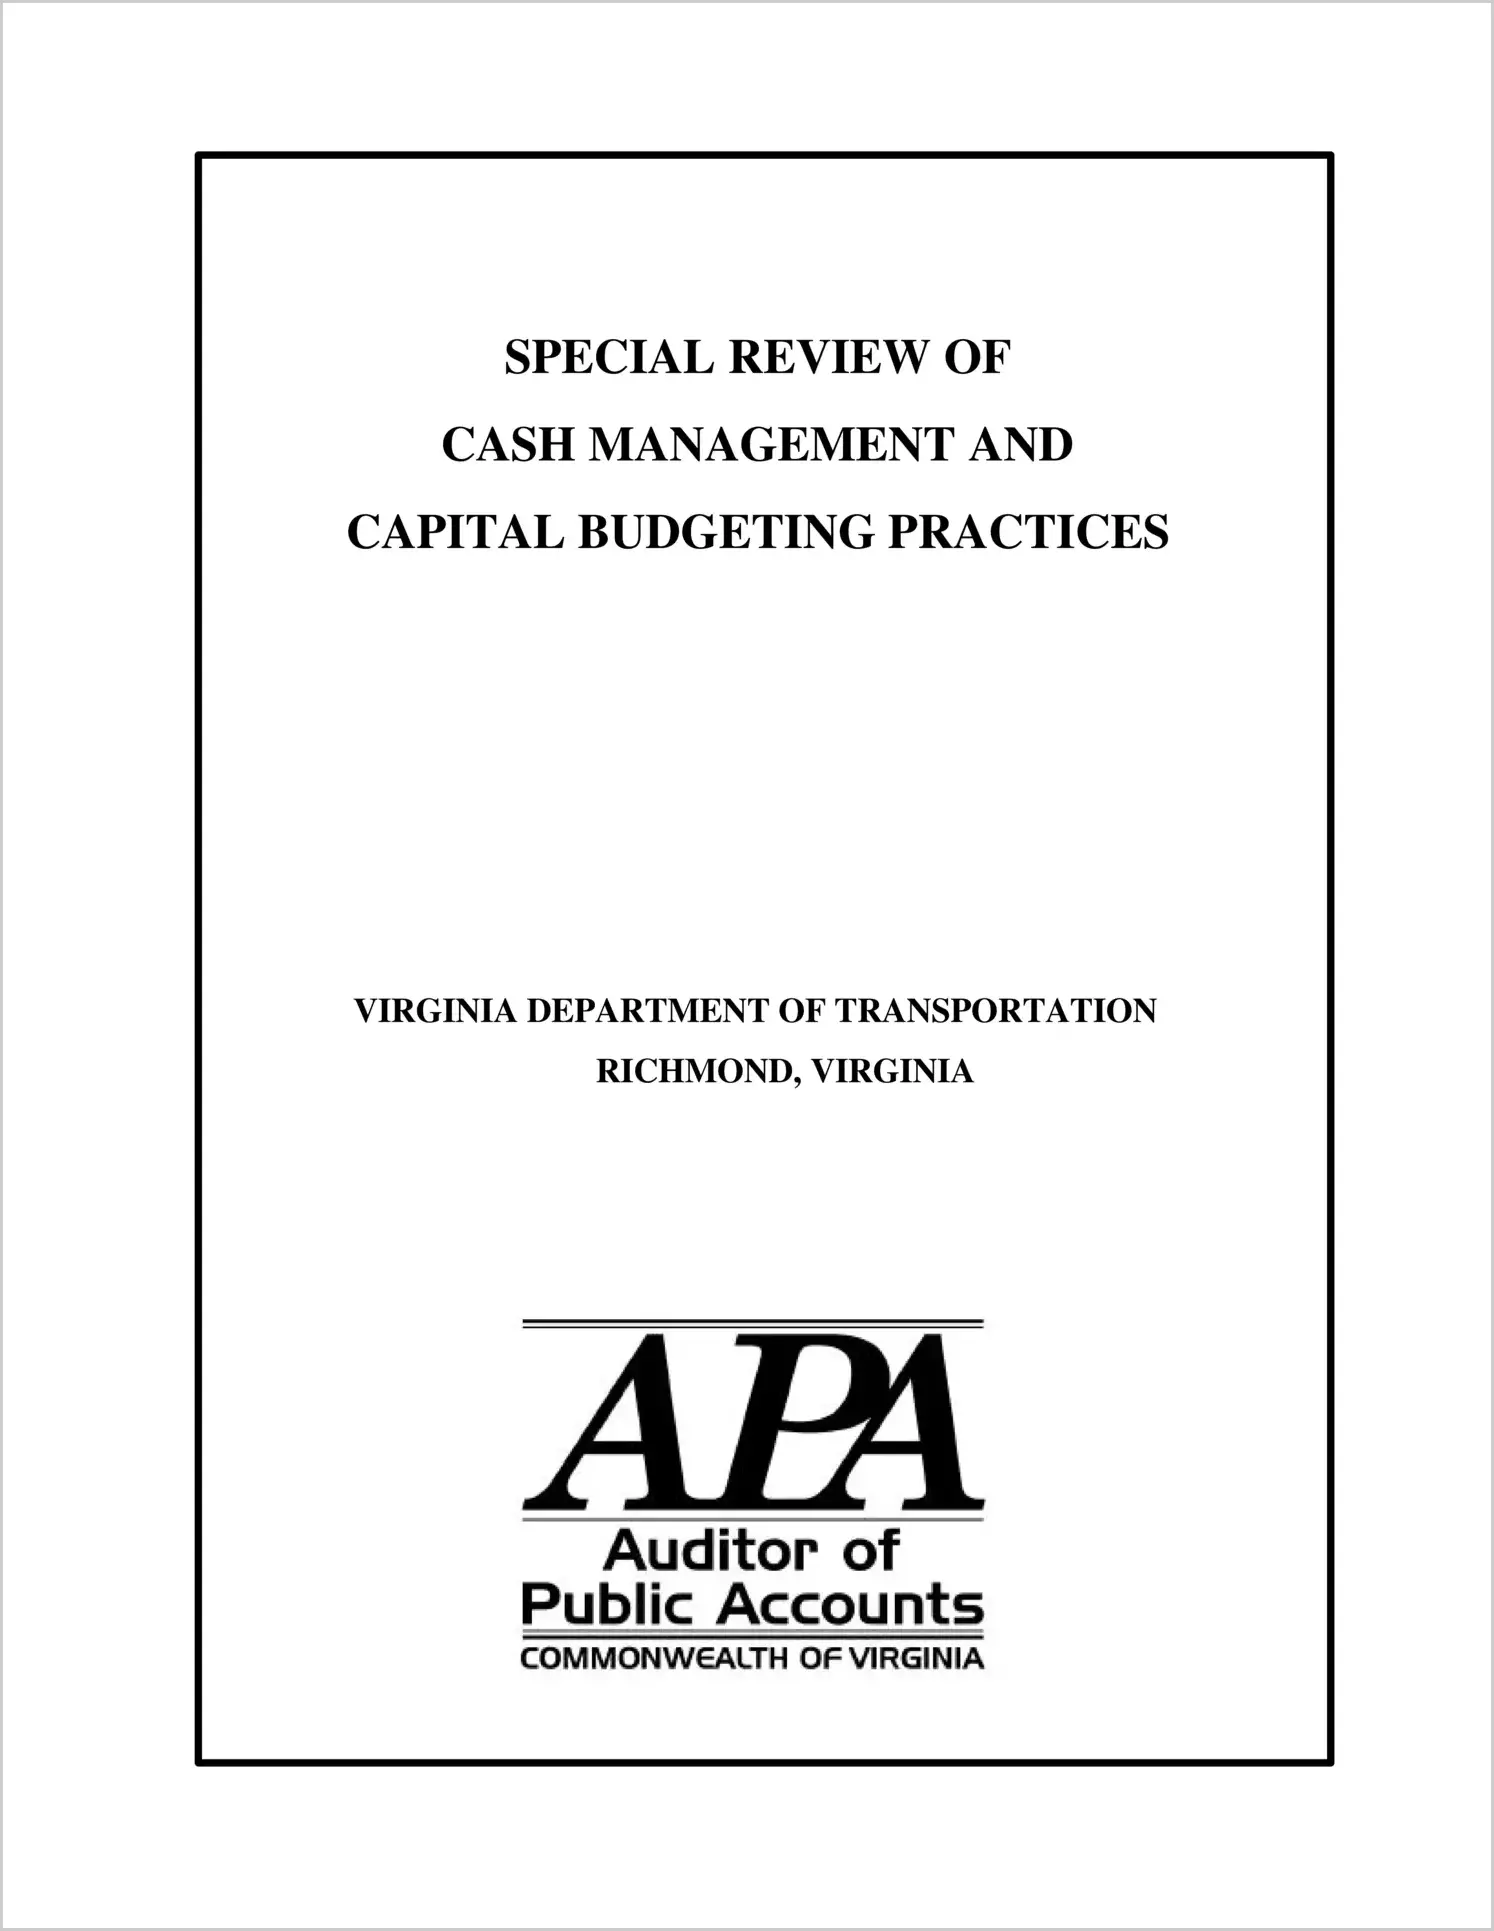 Special ReportSpecial Review of the Cash Management and Capital Budgeting Practices in the Virginia Department of Transportation(Report Date: 7/8/2002)